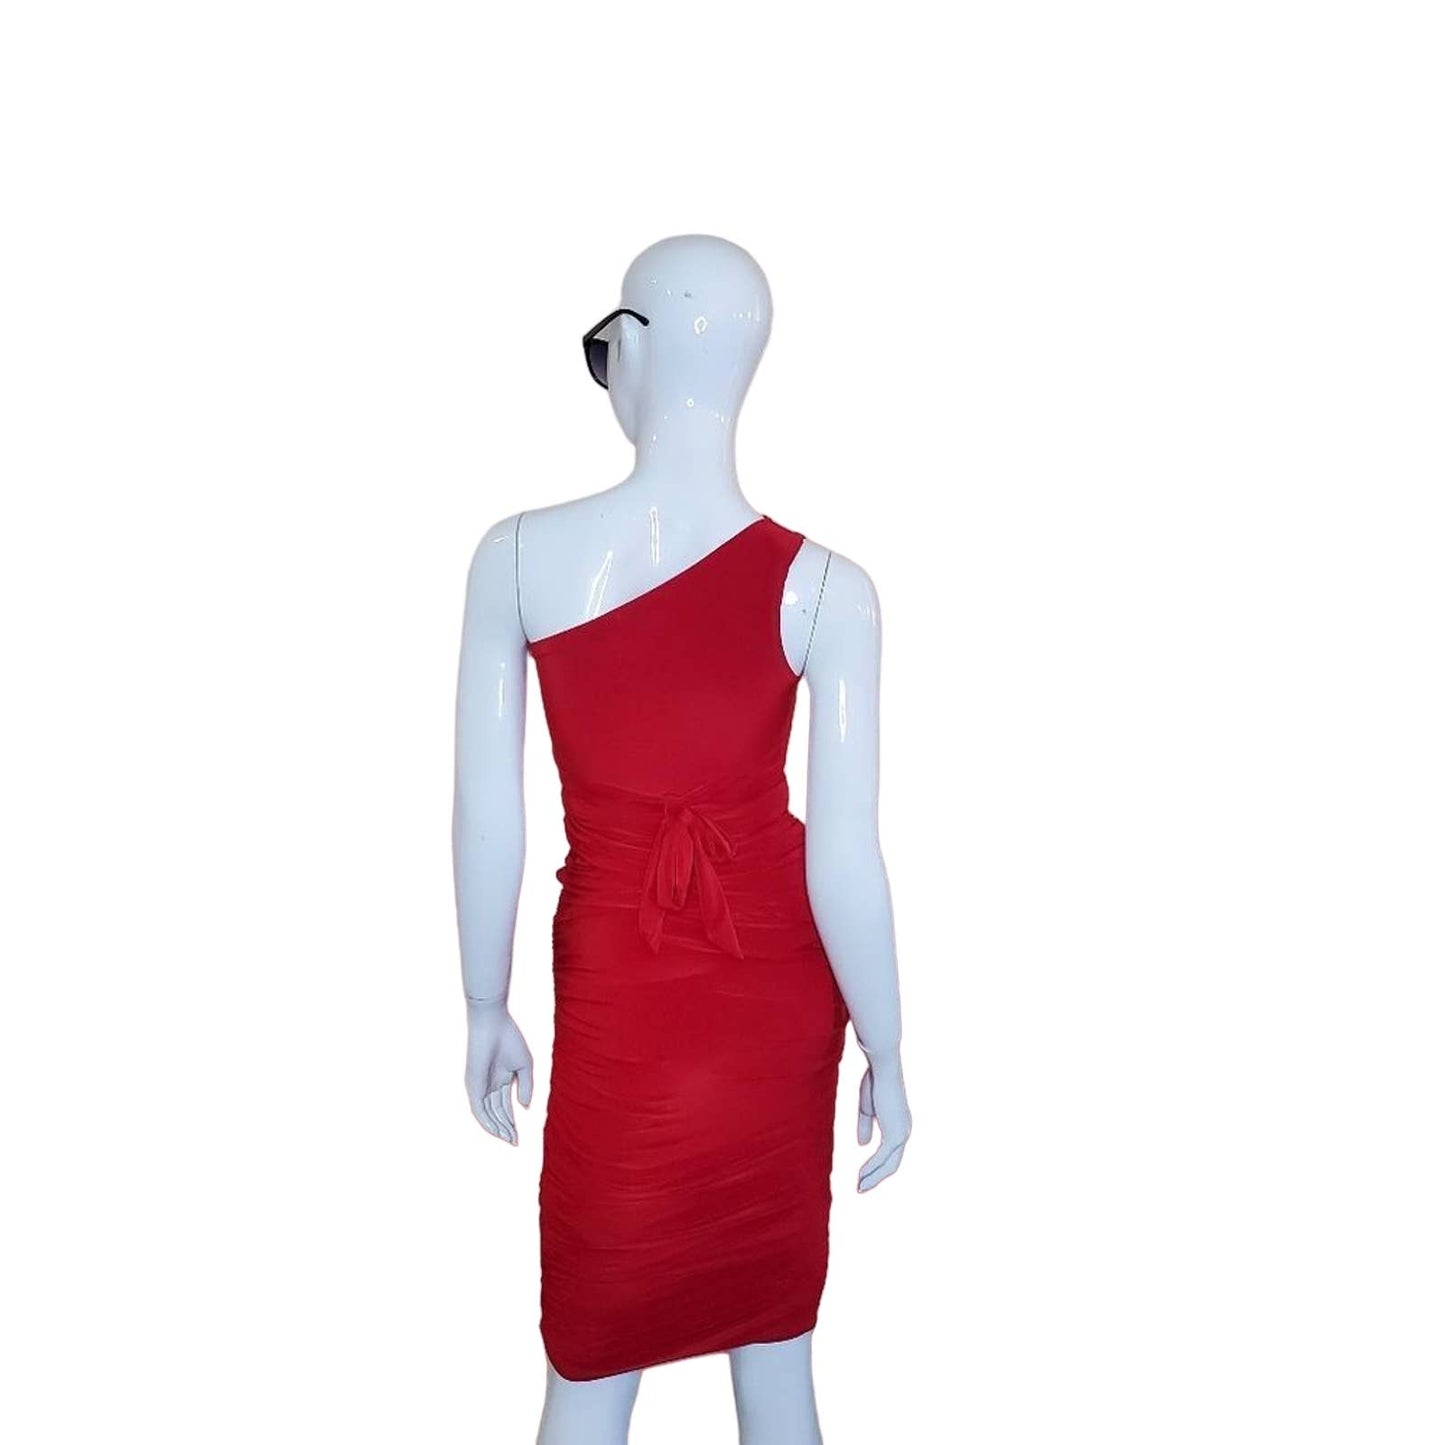 Femme Luxe One Shoulder Sleeveless Bodycon Red Dress, Size UK6/US 0